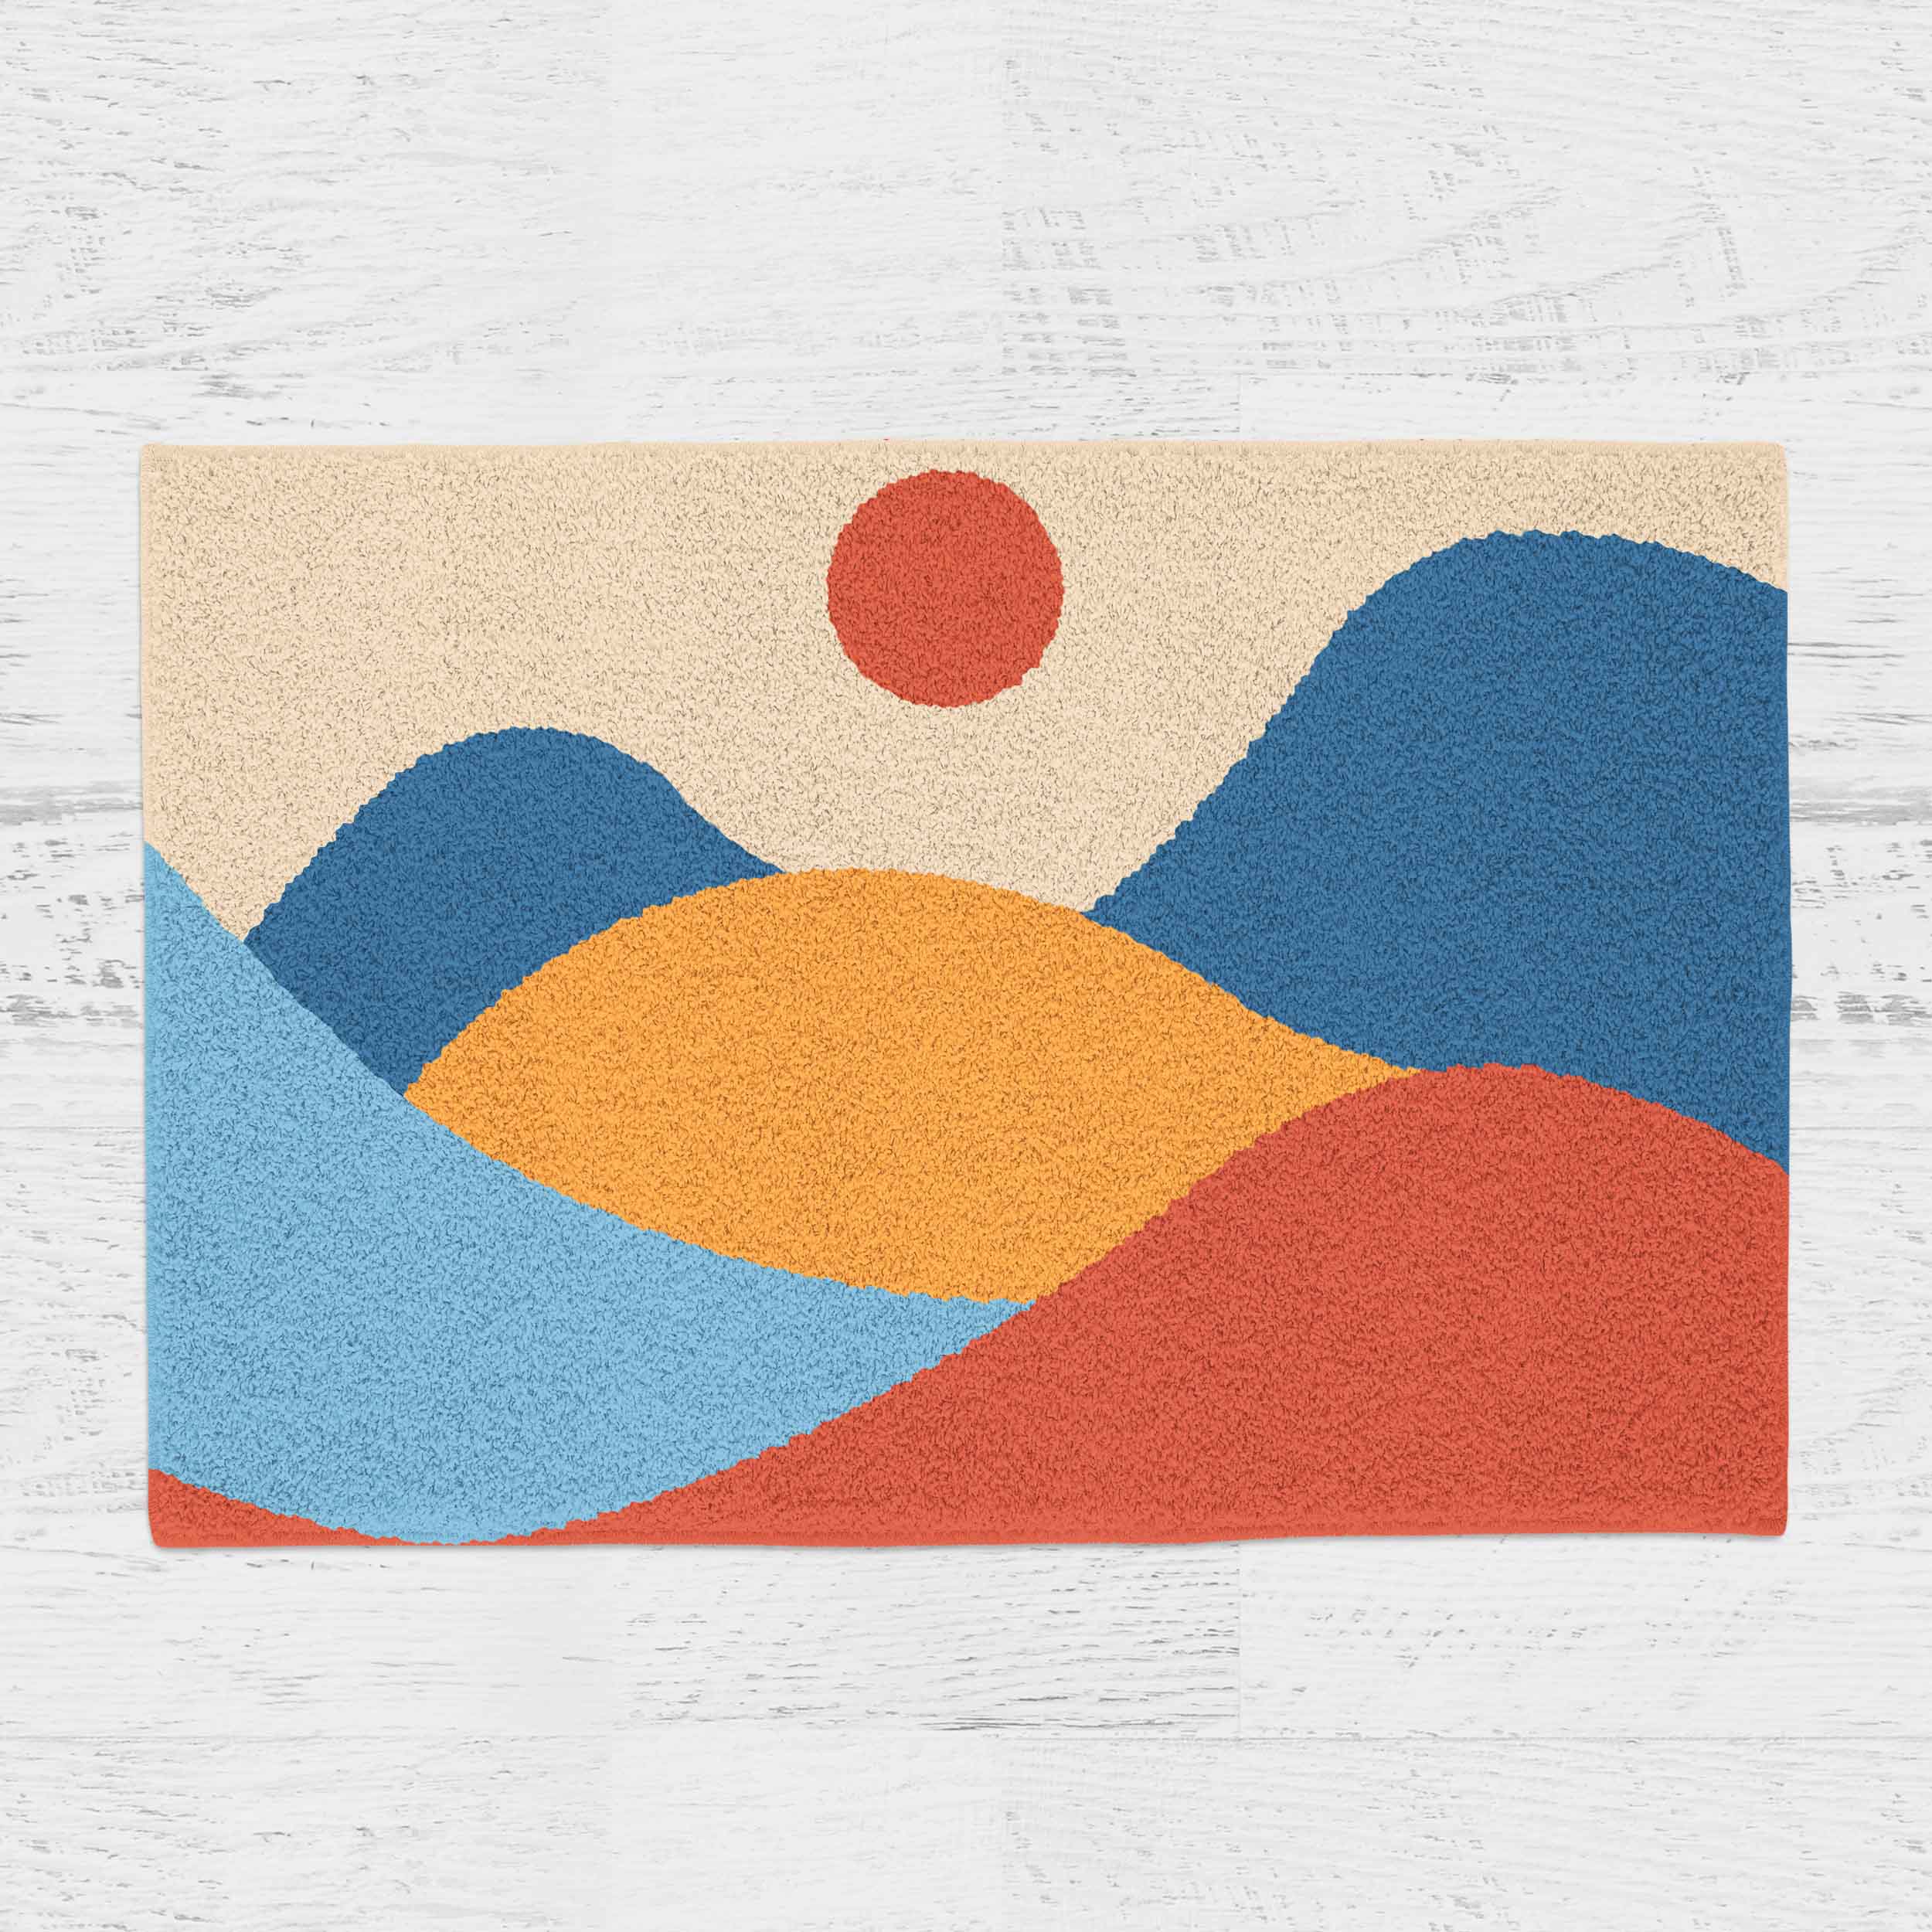 Feblilac Red Blue Sunset Mountains Tufted Bath Mat